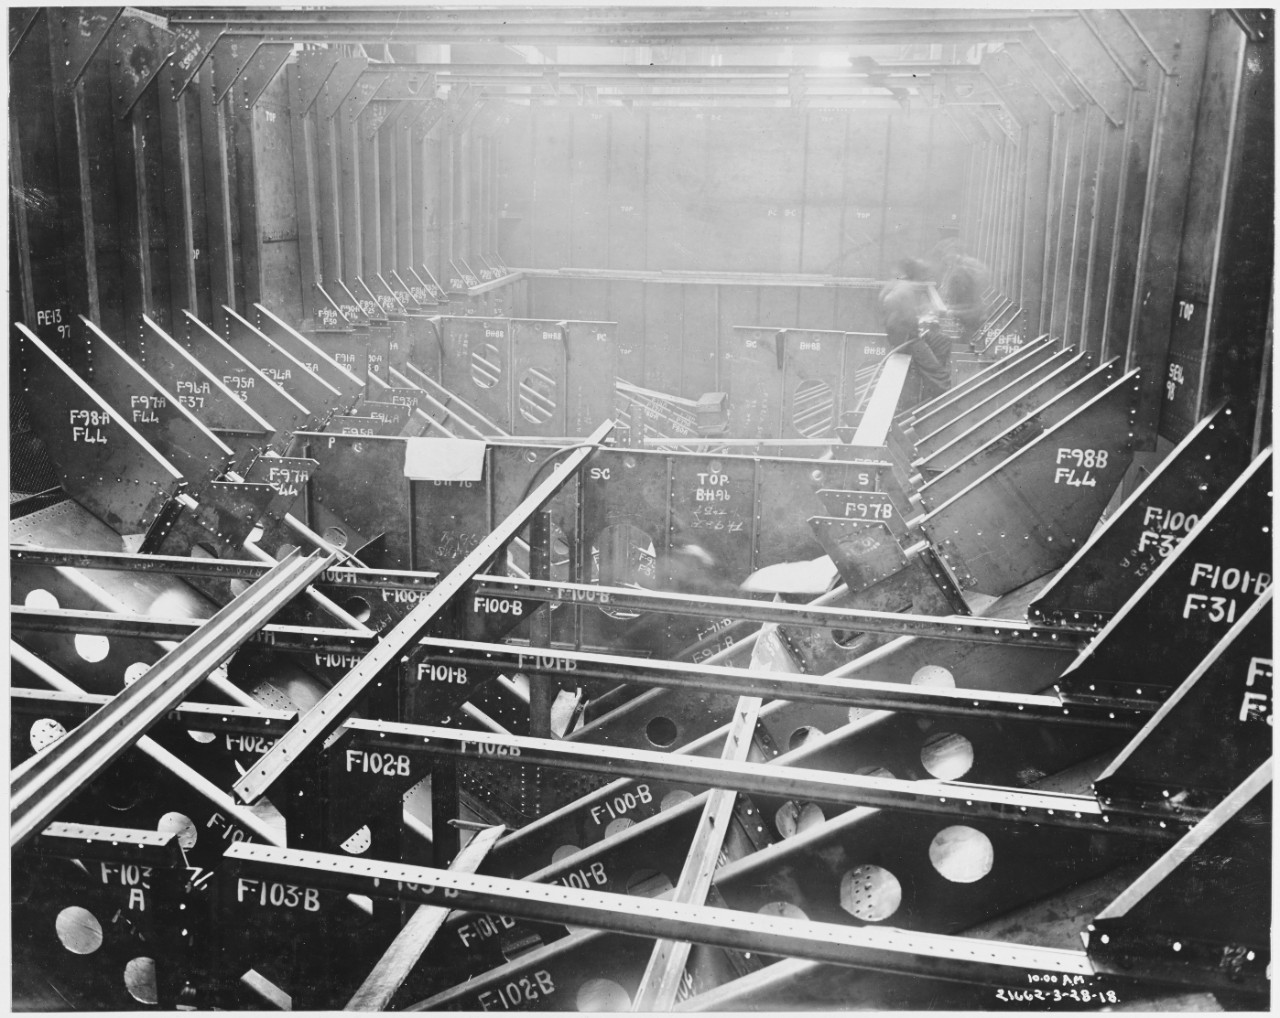 Construction of Ford Eagle Boats (200' Patrol Boats #1 to 60) Ford Motor Company, March 28, 1918